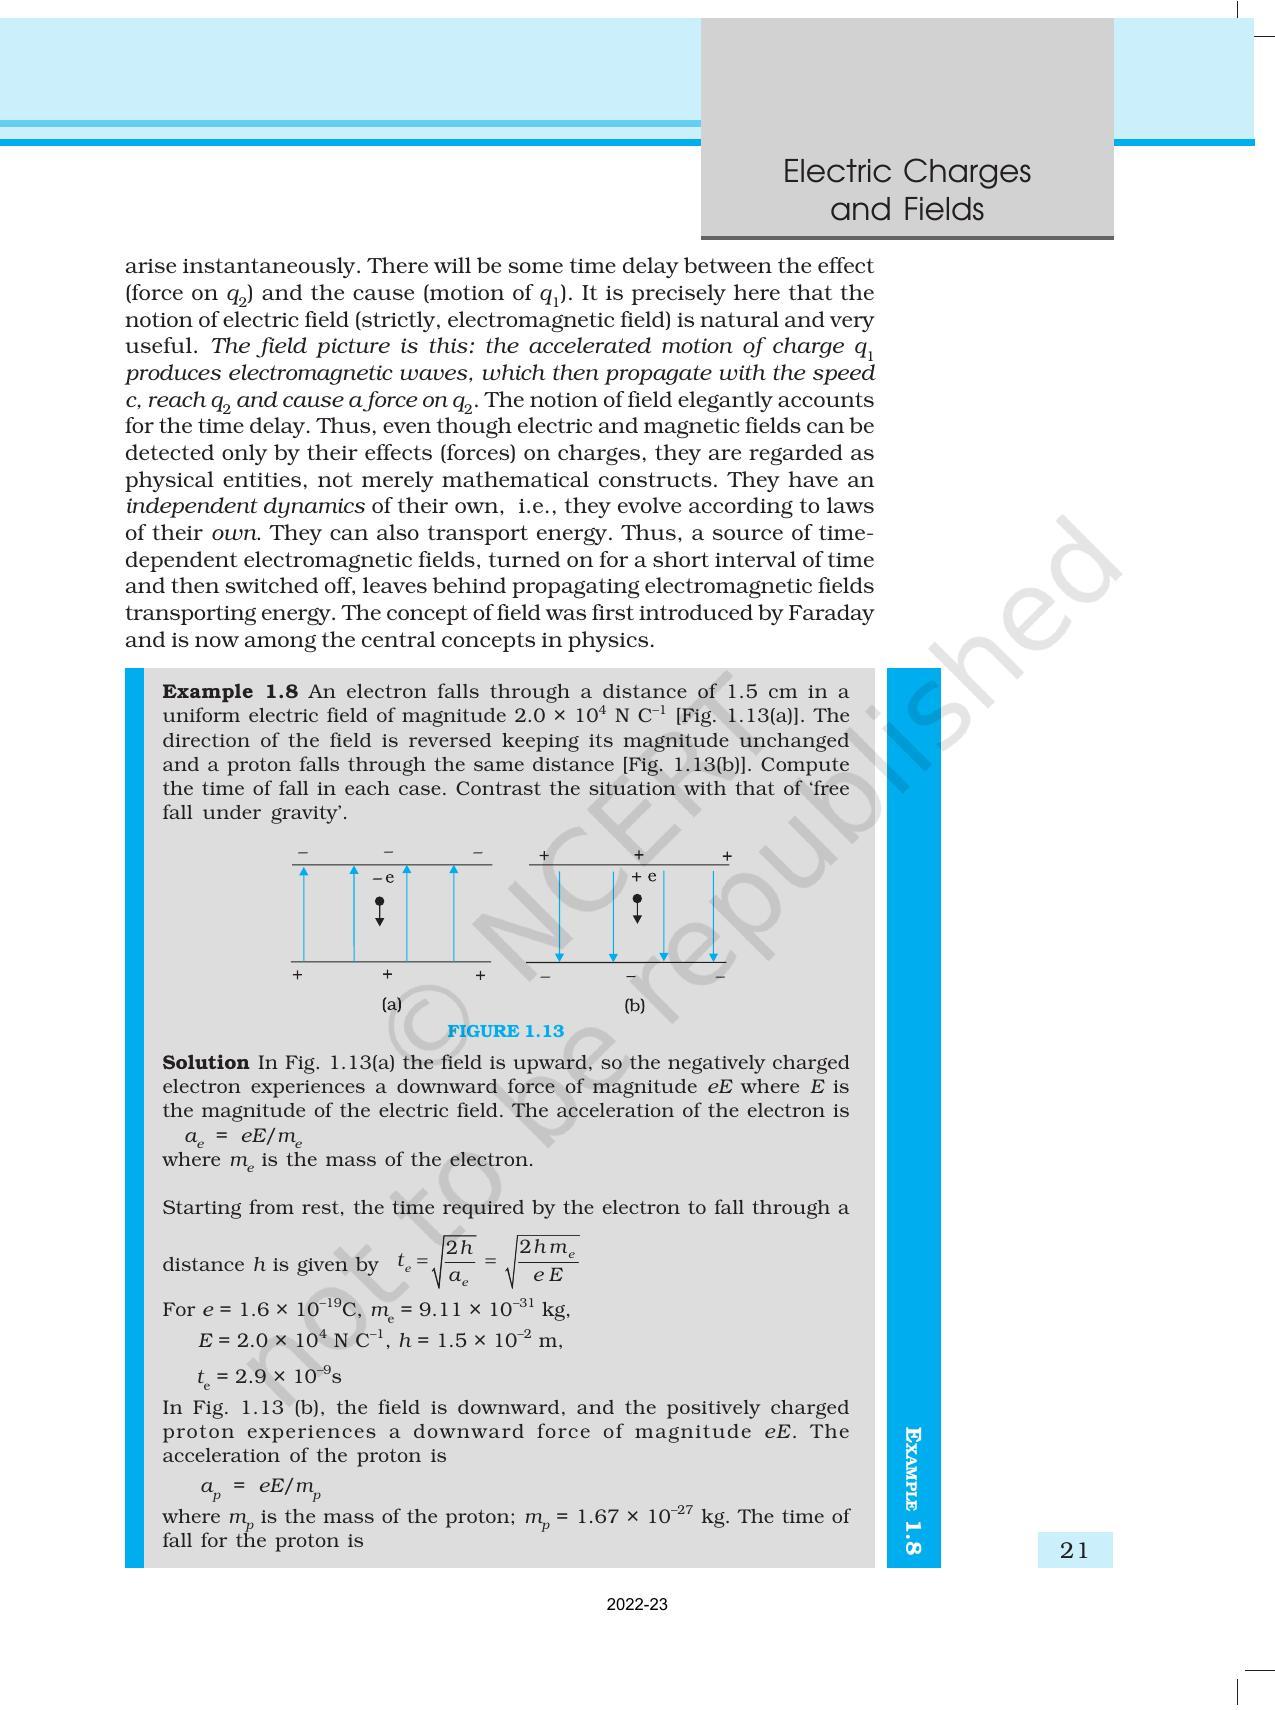 NCERT Book for Class 12 Physics Chapter 1 Electric Charges and Fields - Page 21